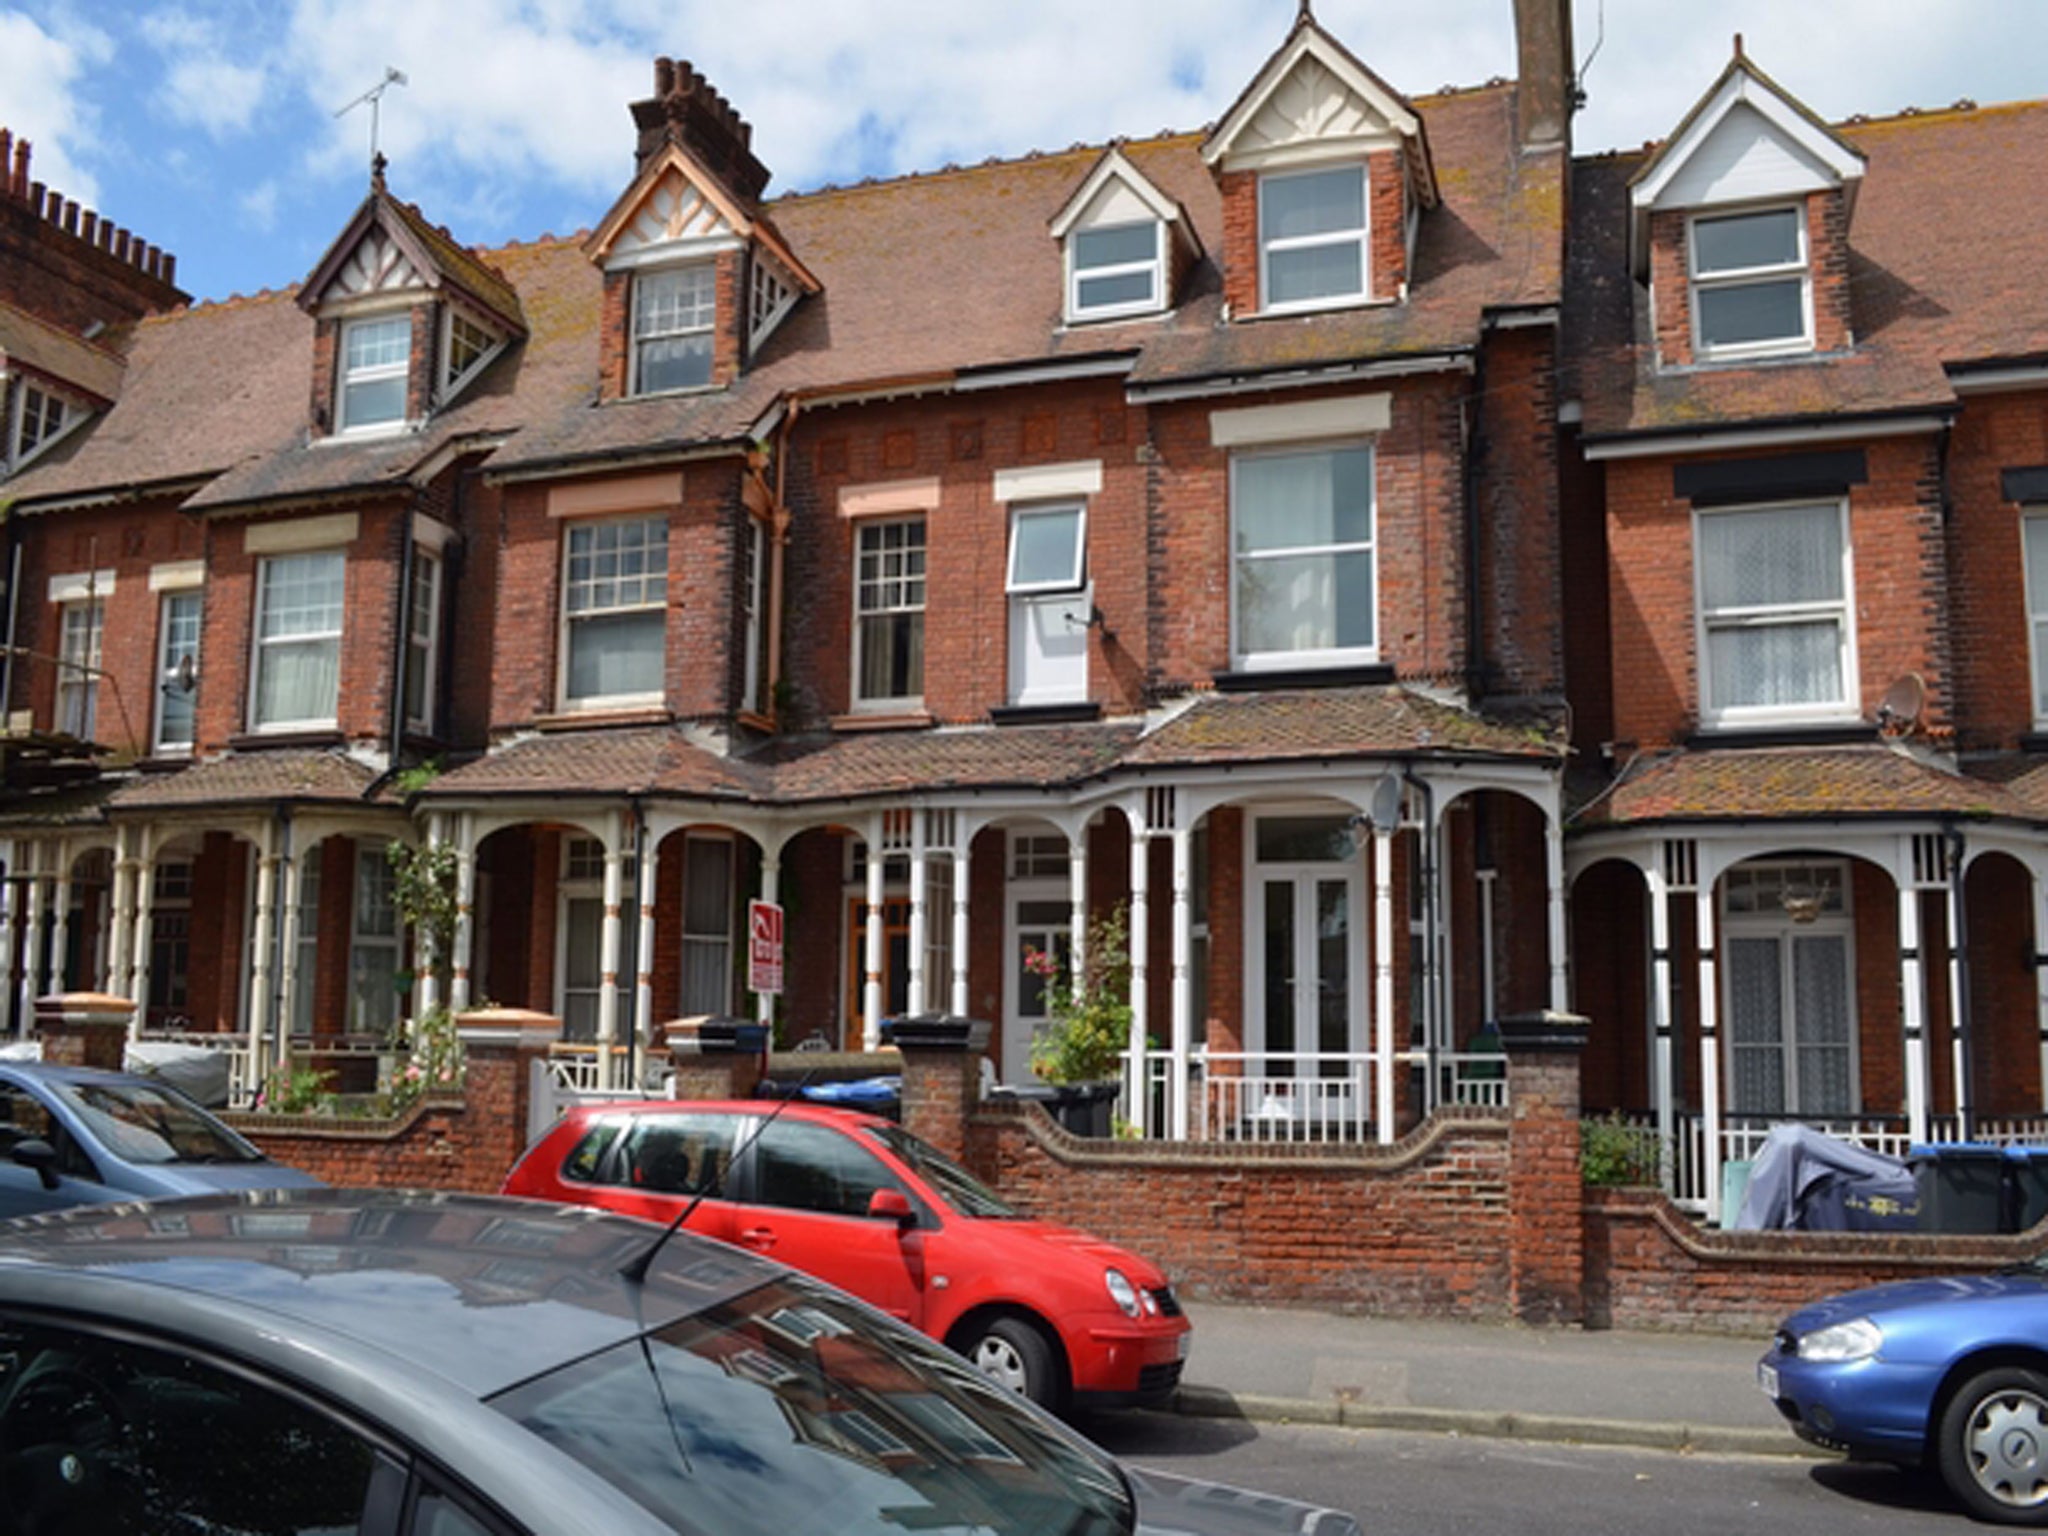 A two bedroom maisonette to rent in Westbrook Gardens, Margate, at £150 per week, on with New Space Margate.